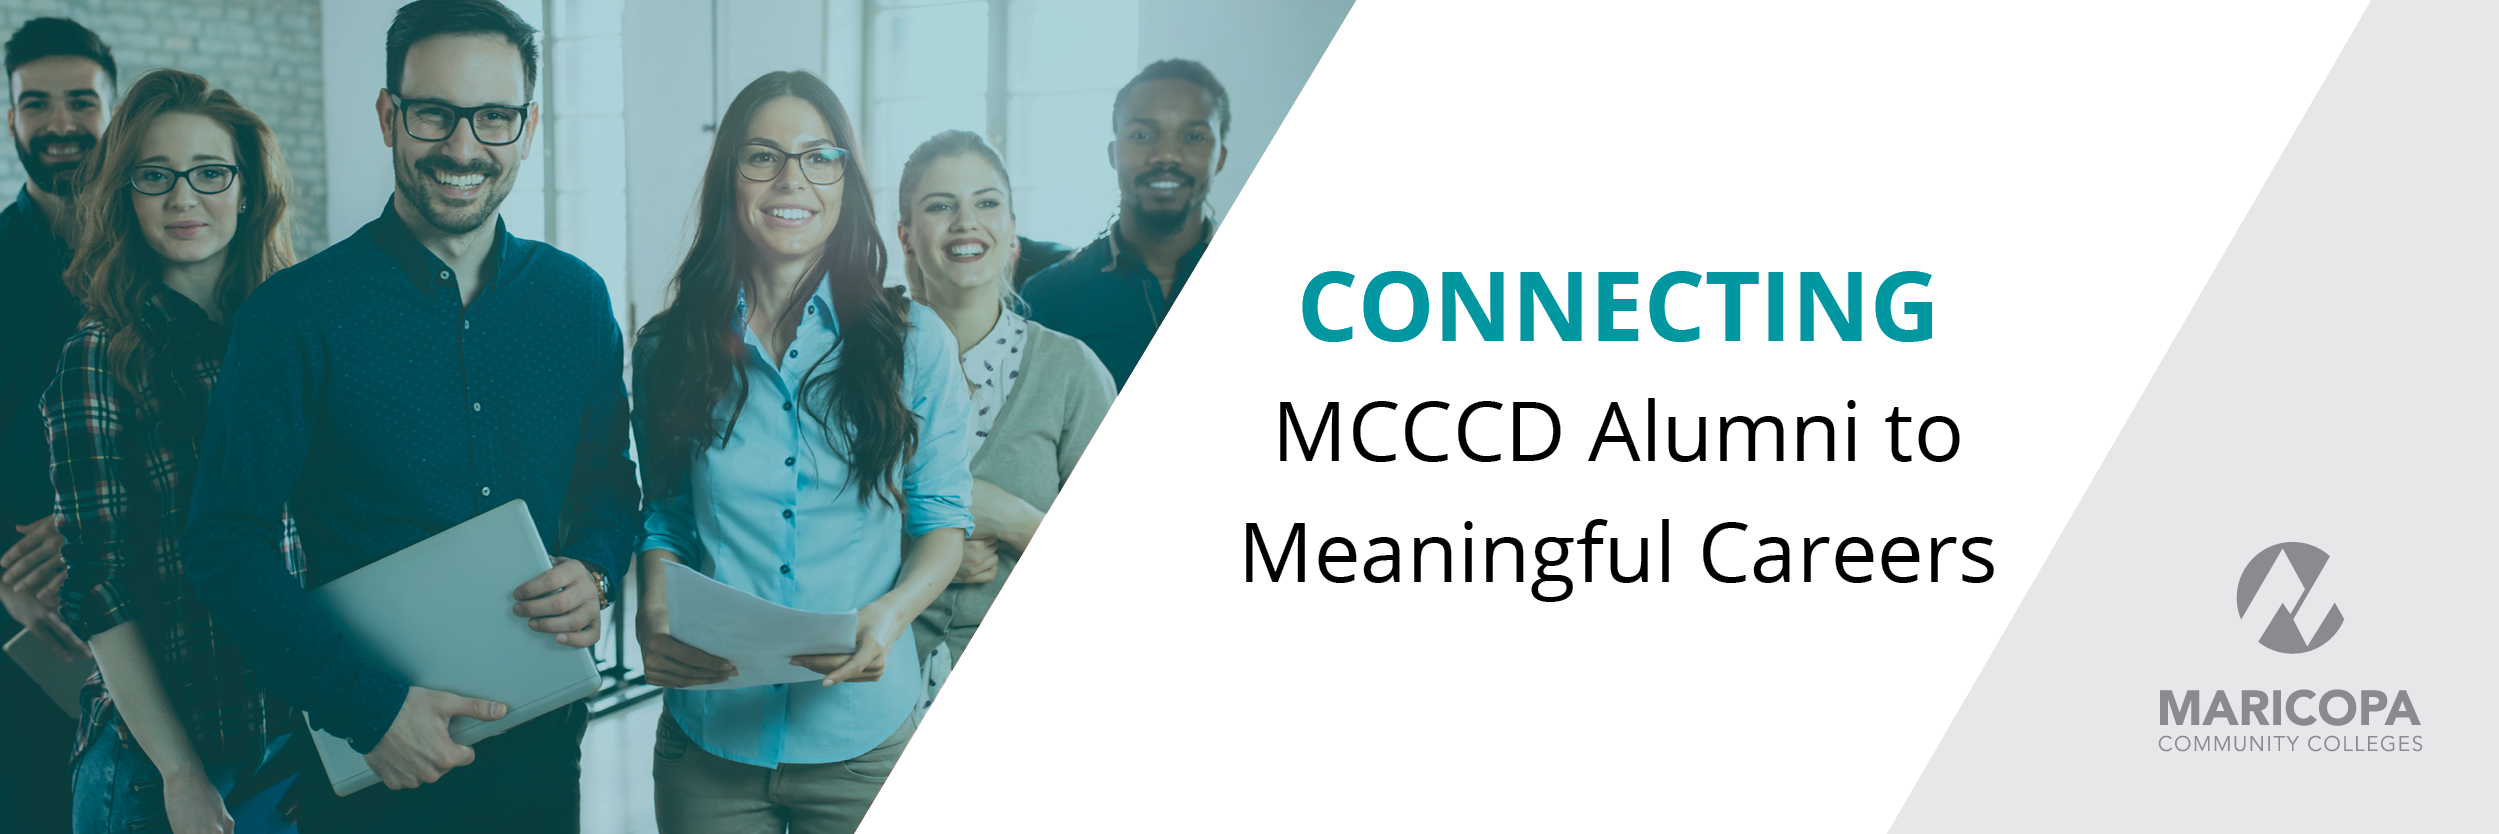 Connecting MCCCD alumni to meaningful careers